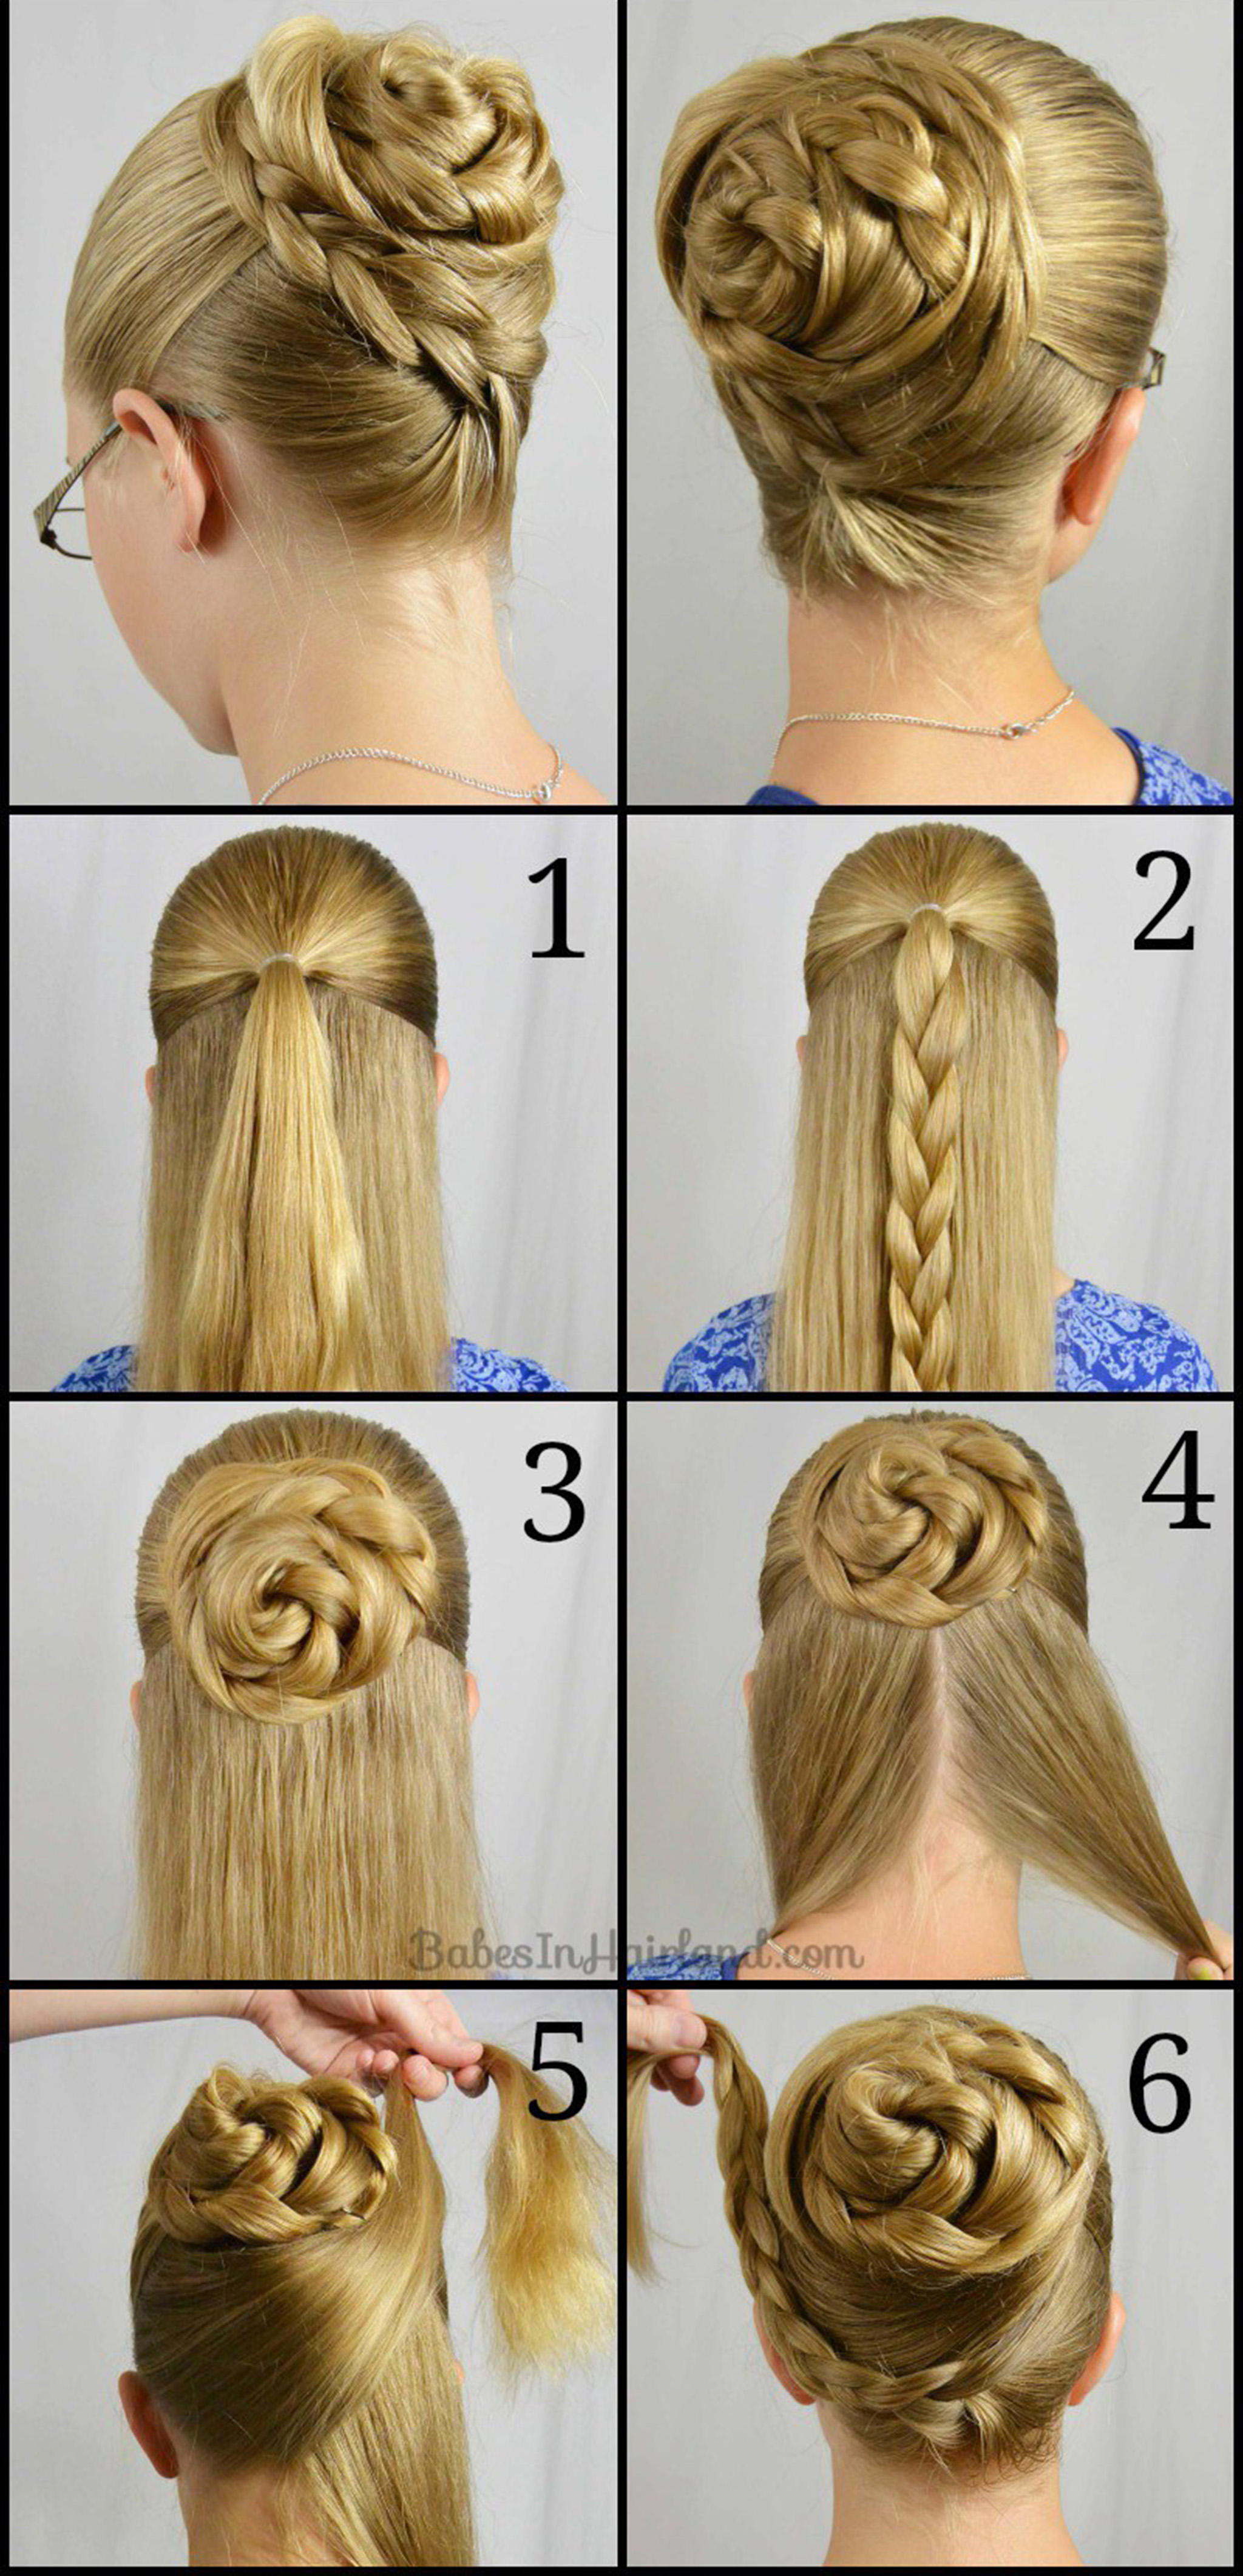 Top Quick Easy Braided Hairstyles Step By Step Hairstyles Tutorials Gymbuddy Now